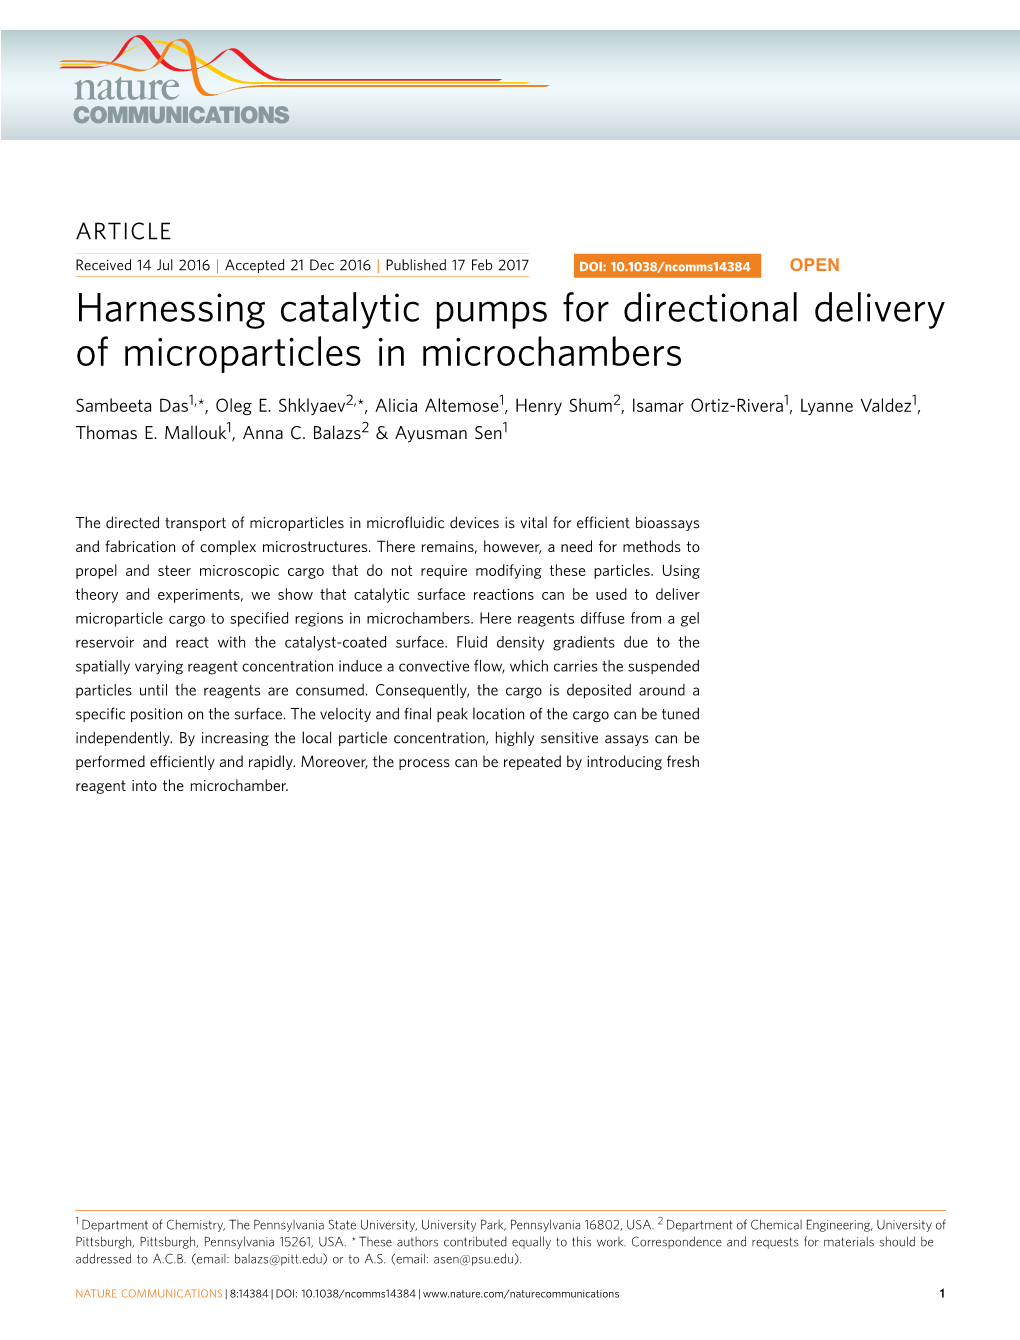 Harnessing Catalytic Pumps for Directional Delivery of Microparticles in Microchambers